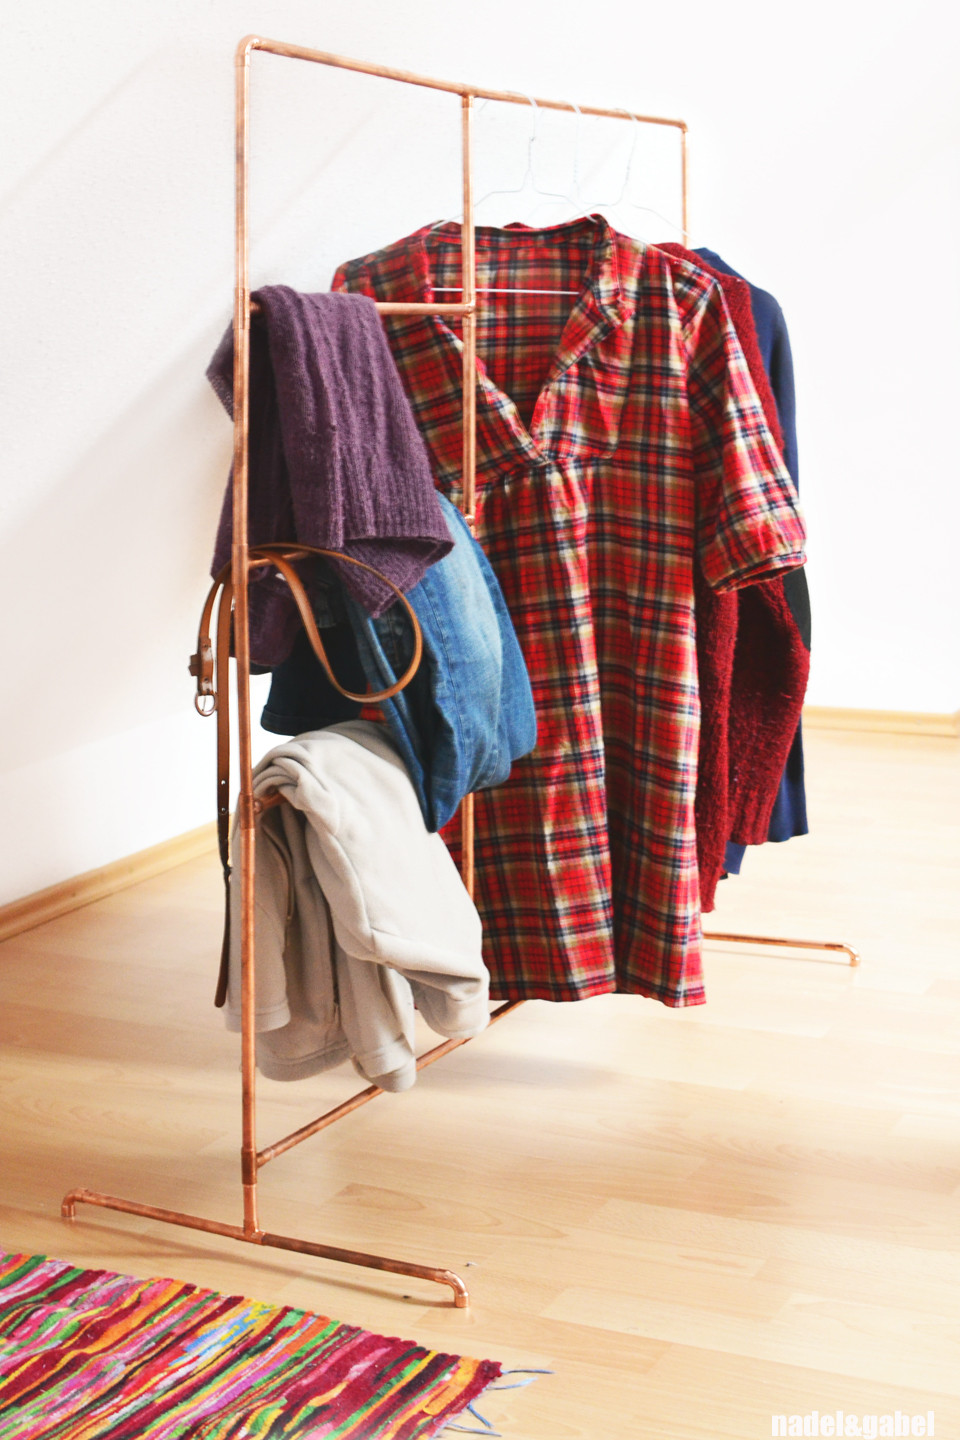 DIY Pipe Clothing Rack
 Copper – DIY clothes rack from copper pipes